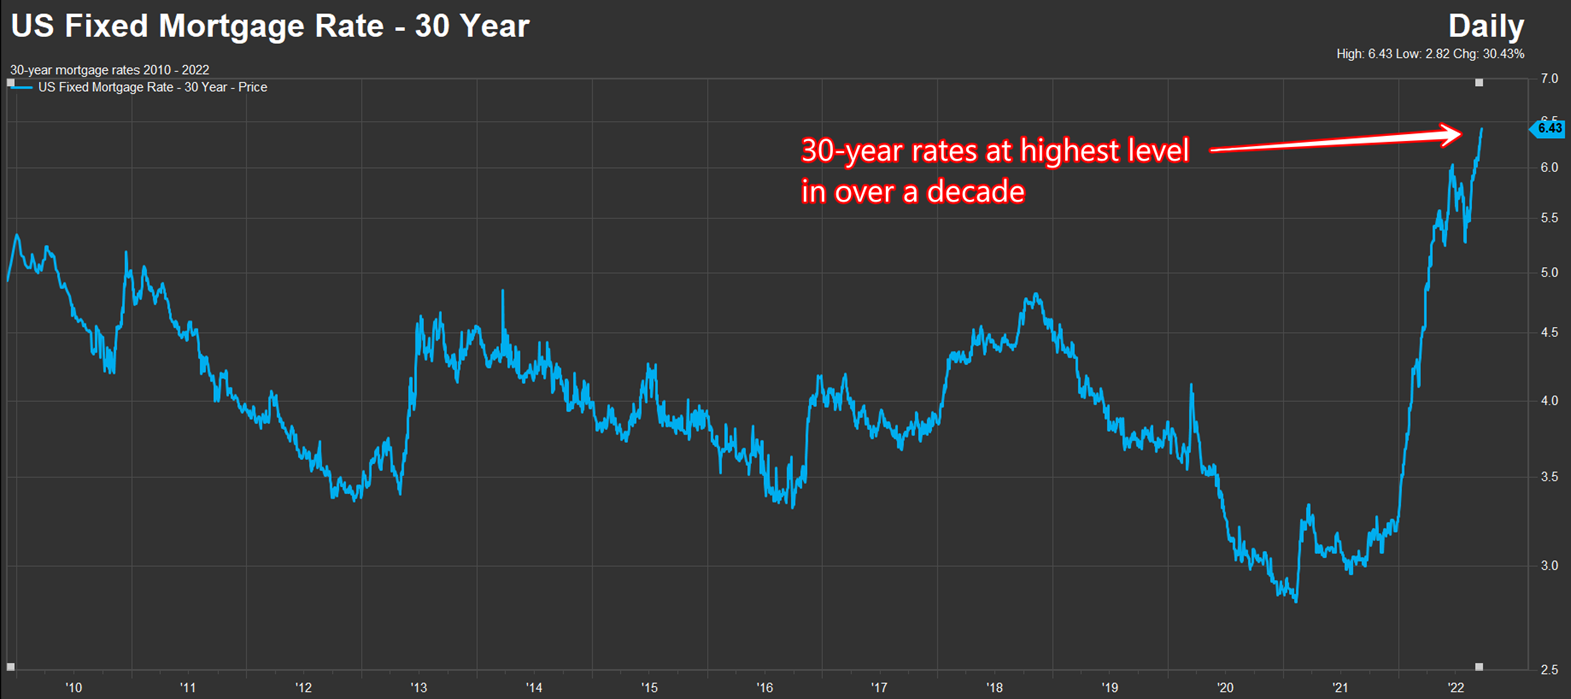 30-year mortgage rates at highest level in over a decade